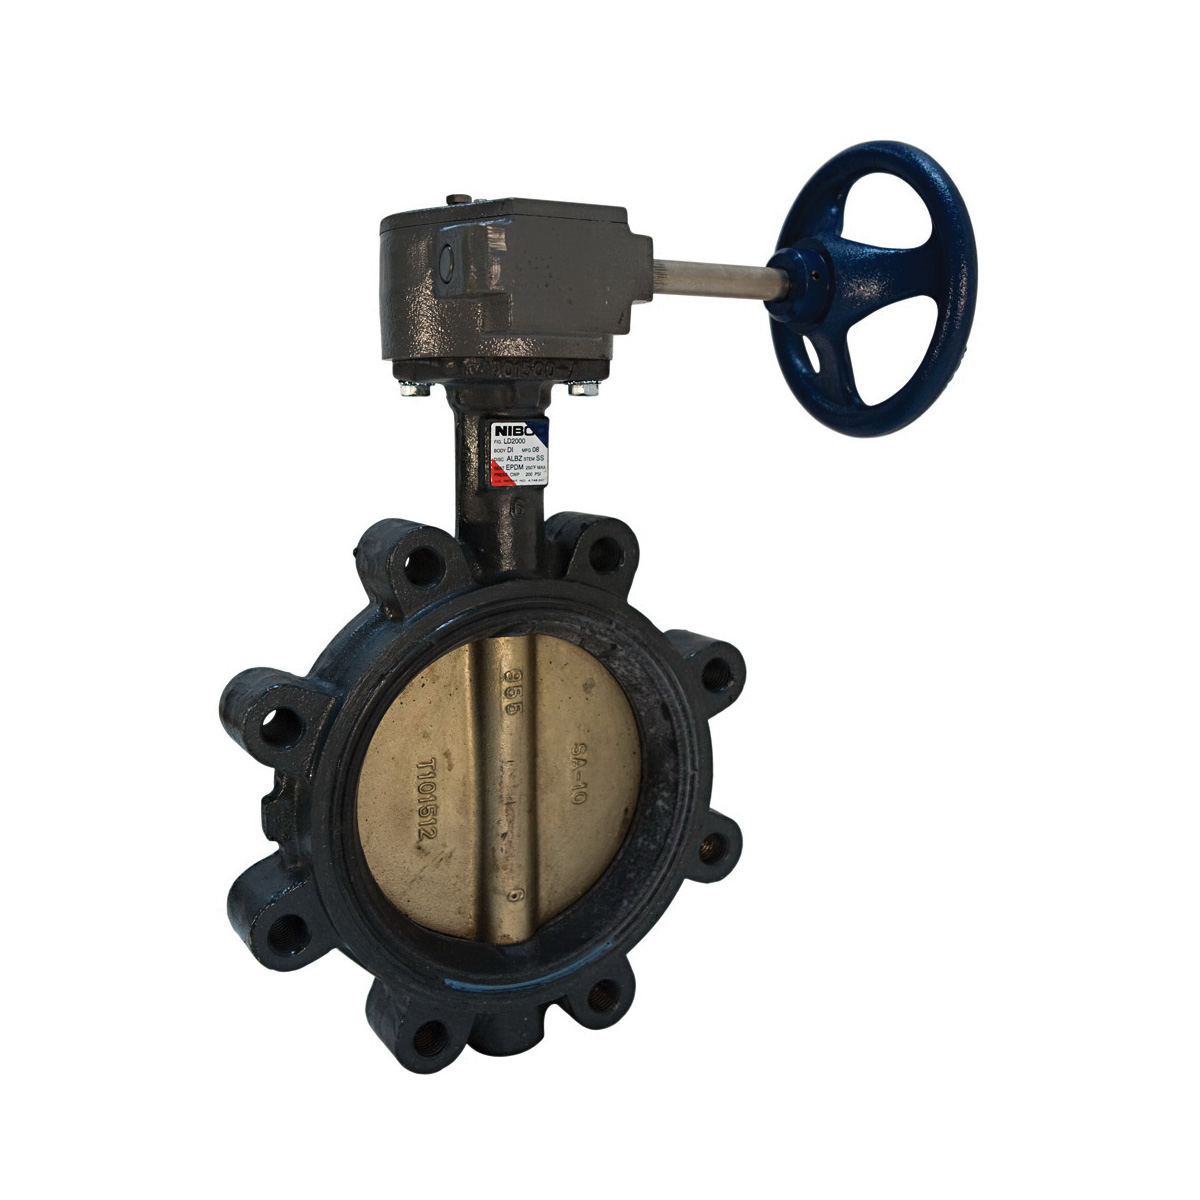 Nibco 12 Lug Ductile Iron Butterfly Valve Manual Gear Handle 200 PSI EPDM